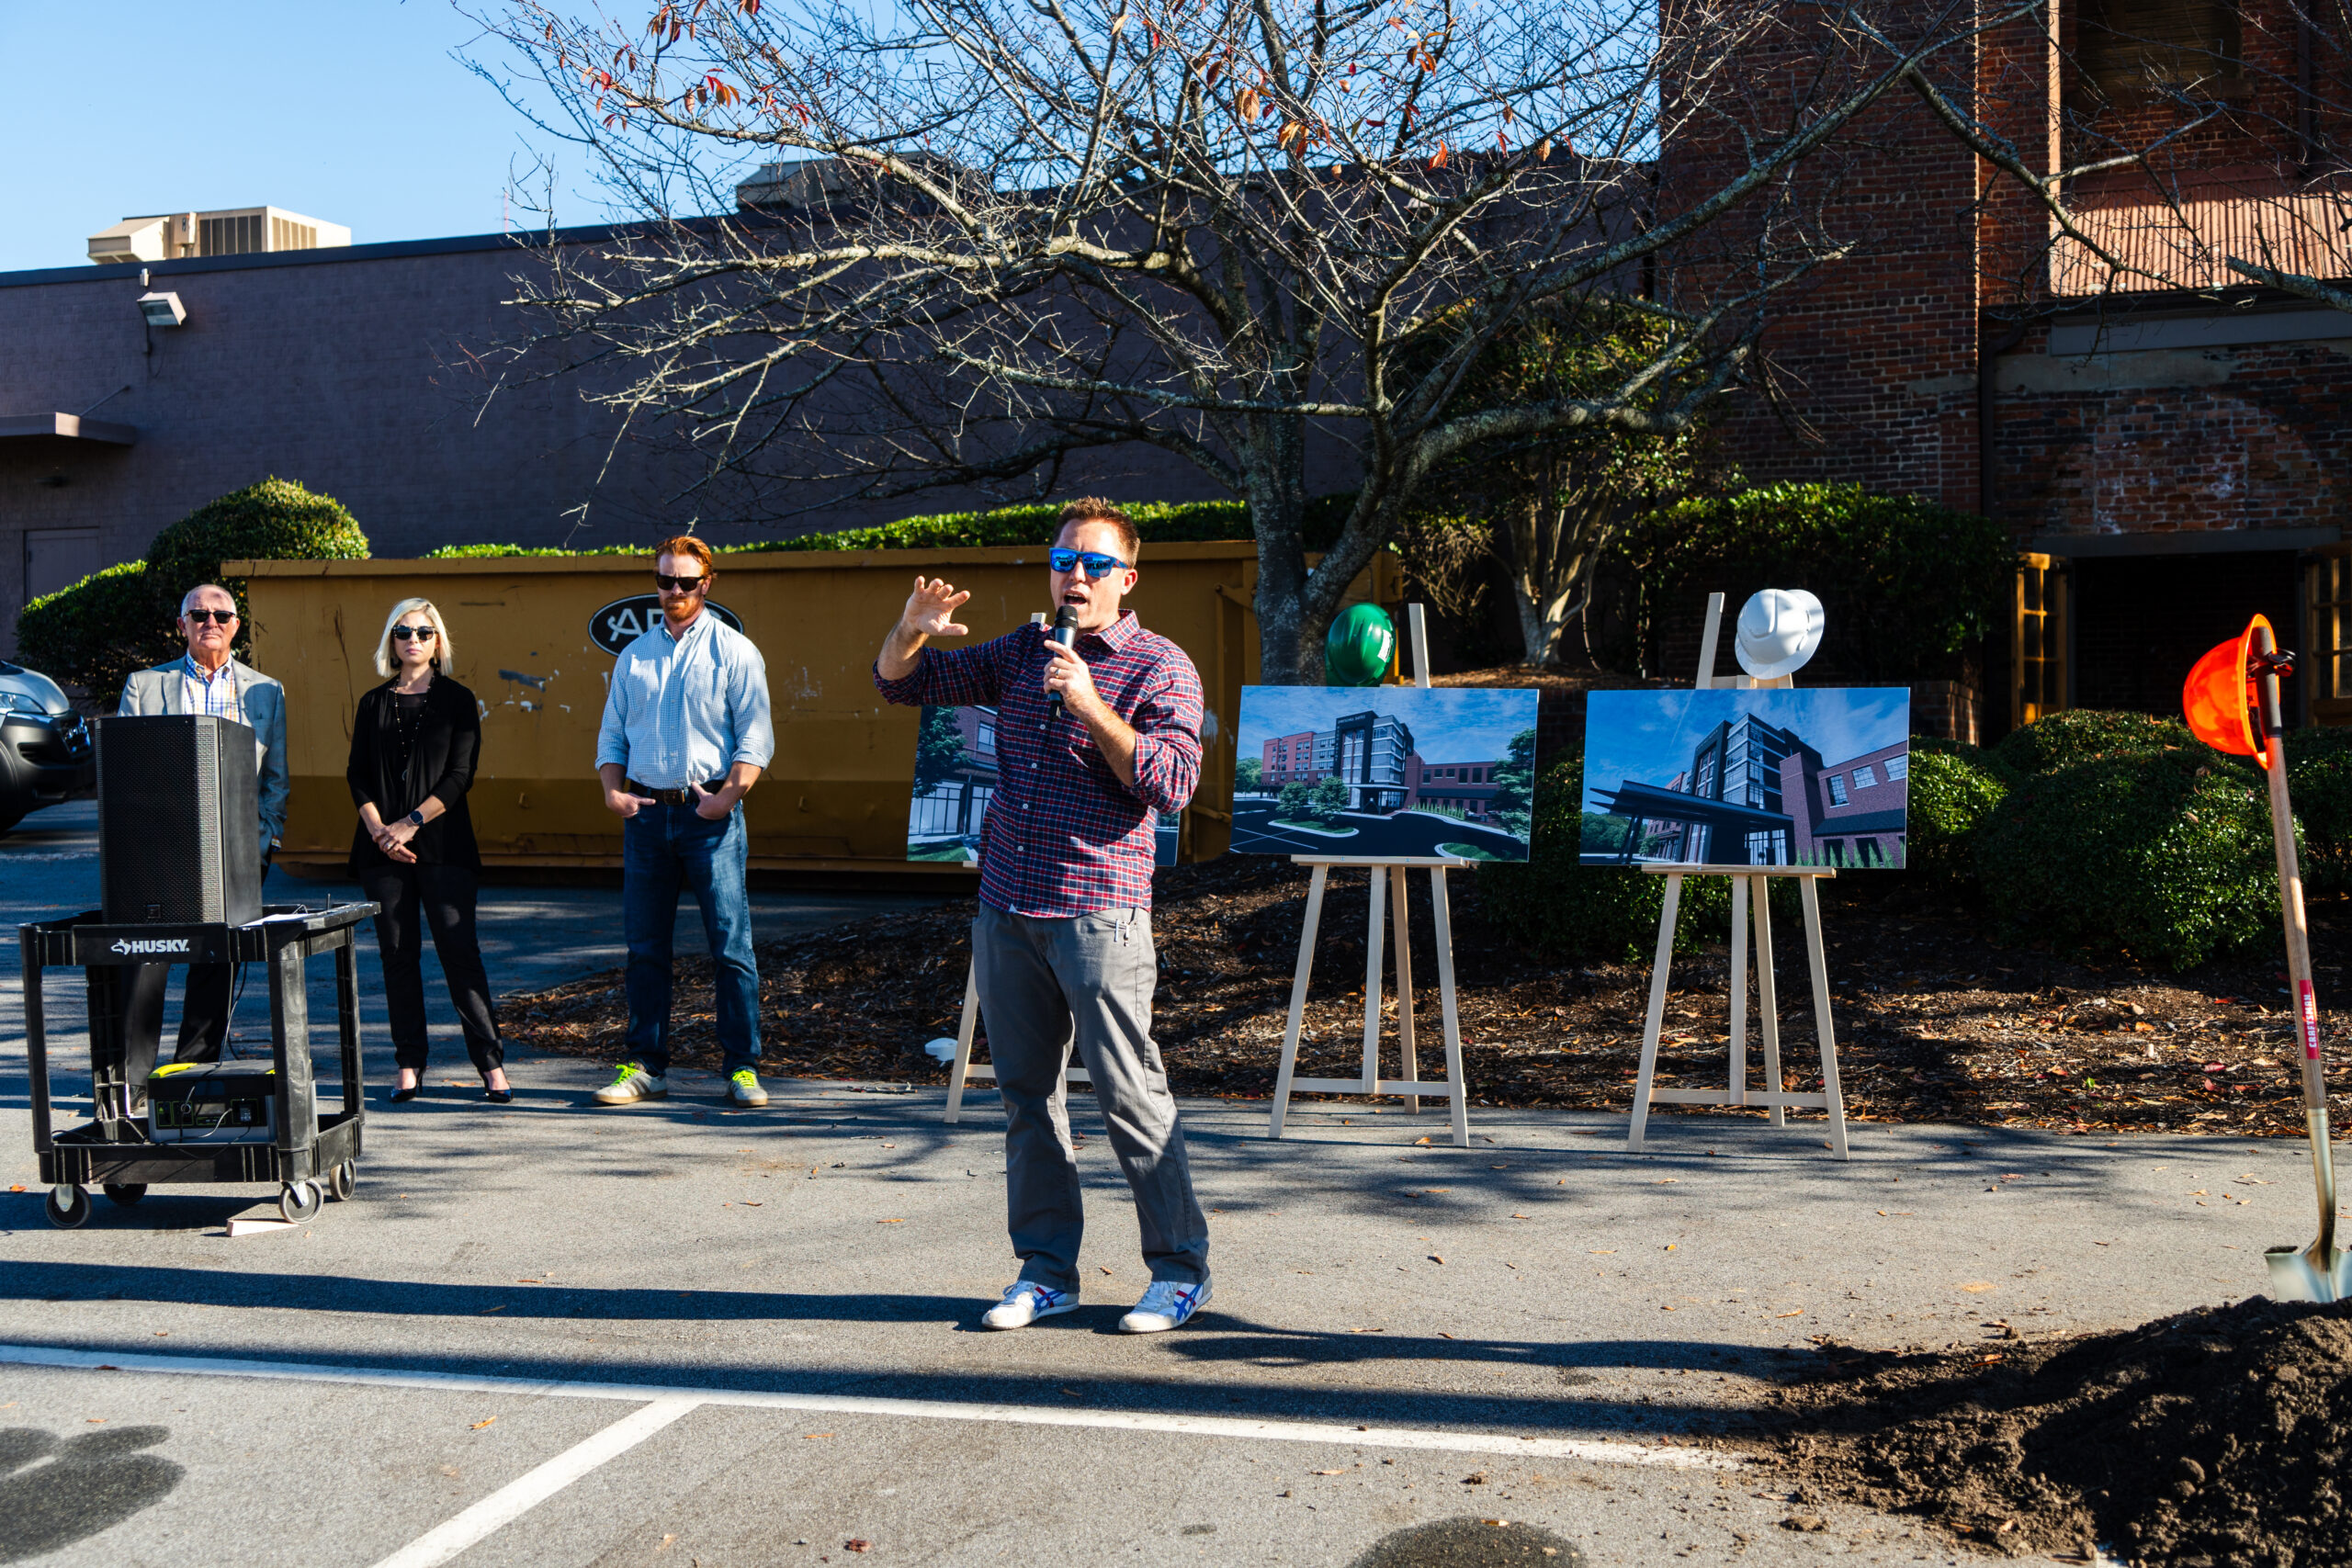 Michael Kren, Co-Founder of Benchmade Ventures, speaks at the Springhill Suites High Point groundbreaking.